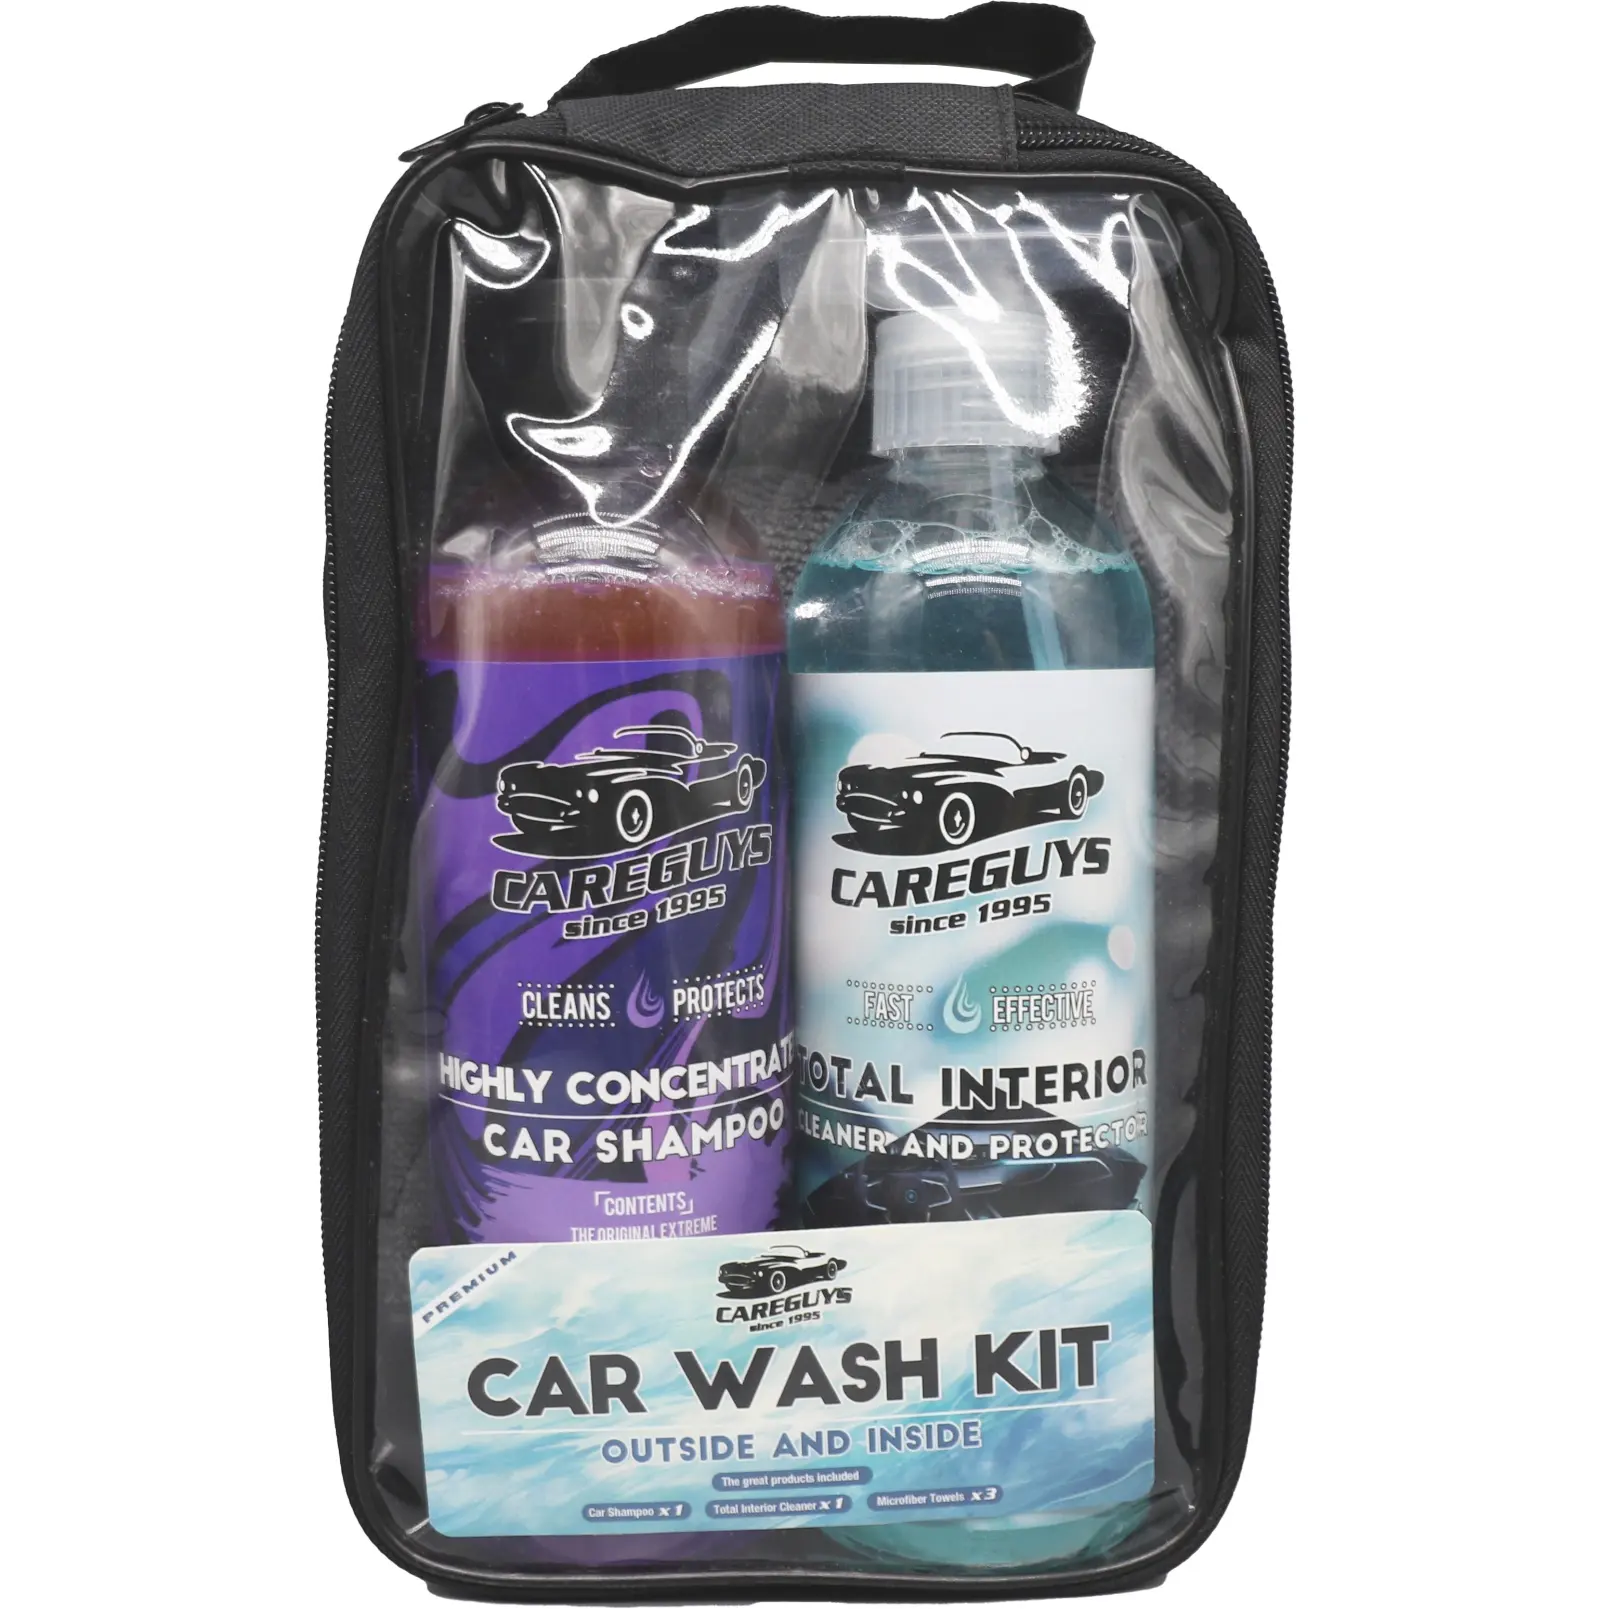 Highly Concentrated Shampoo Waterless Car Wash Tire Shine Care Guys Car Wash Kit with Foam Cannon Car Cleaning Kit